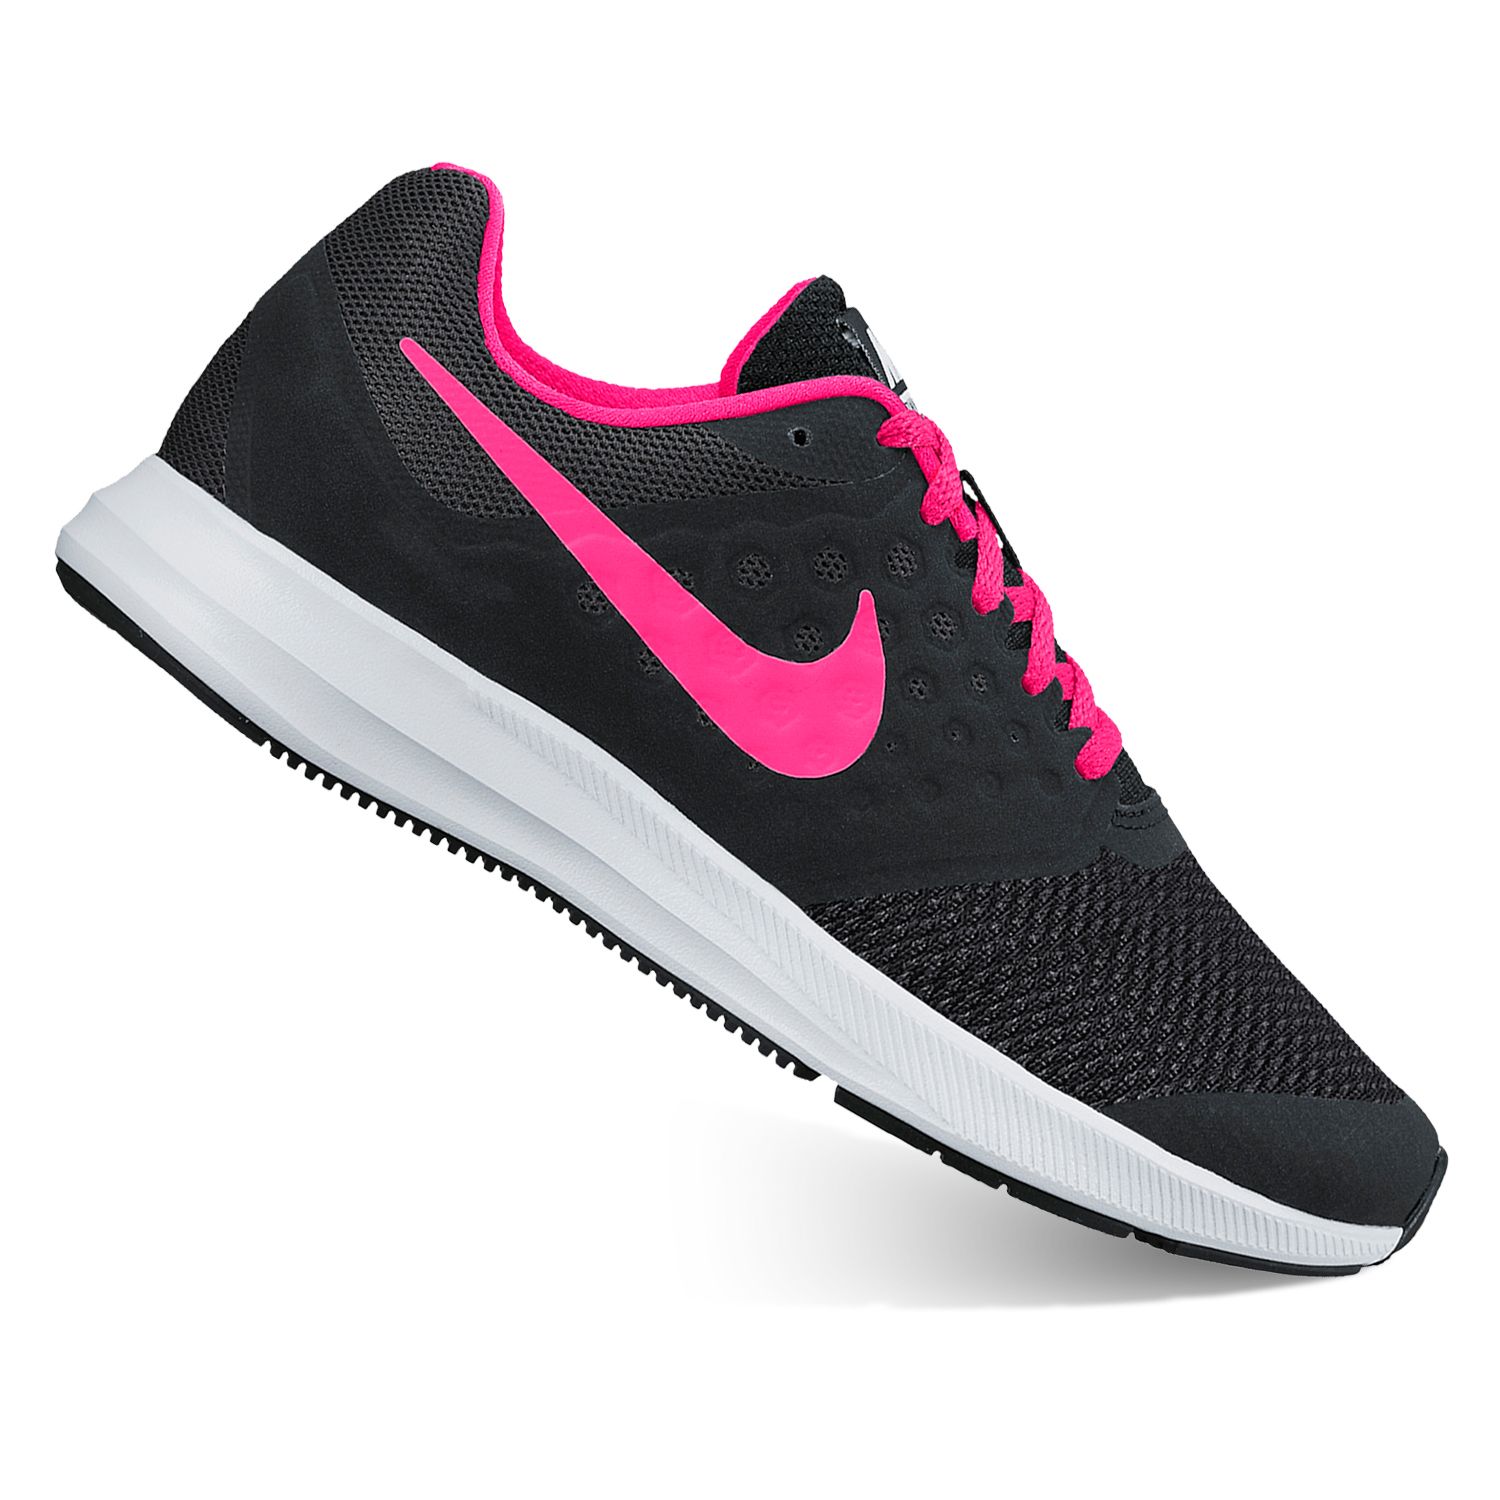 nike sports shoes for girls online -